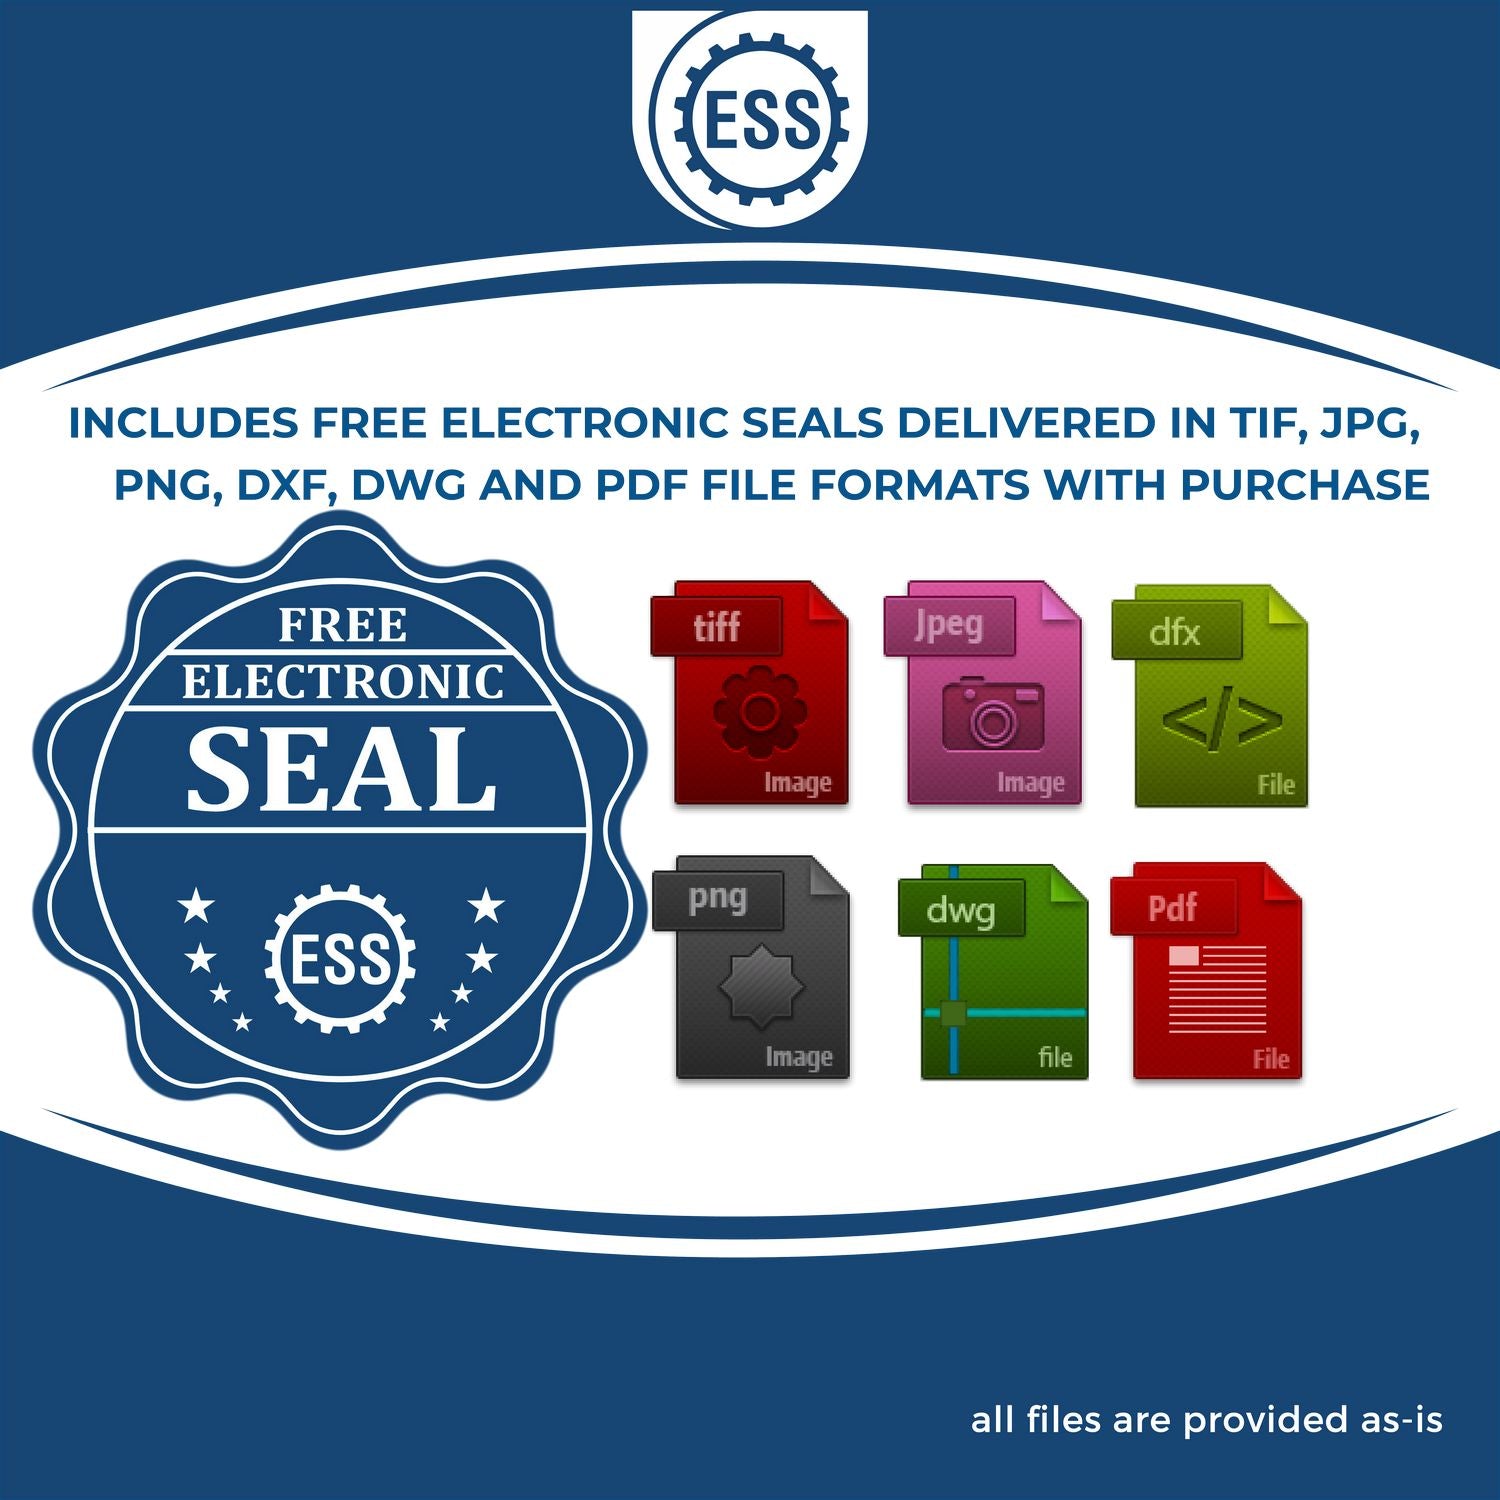 An infographic for the free electronic seal for the Soft Puerto Rico Professional Engineer Seal illustrating the different file type icons such as DXF, DWG, TIF, JPG and PNG.